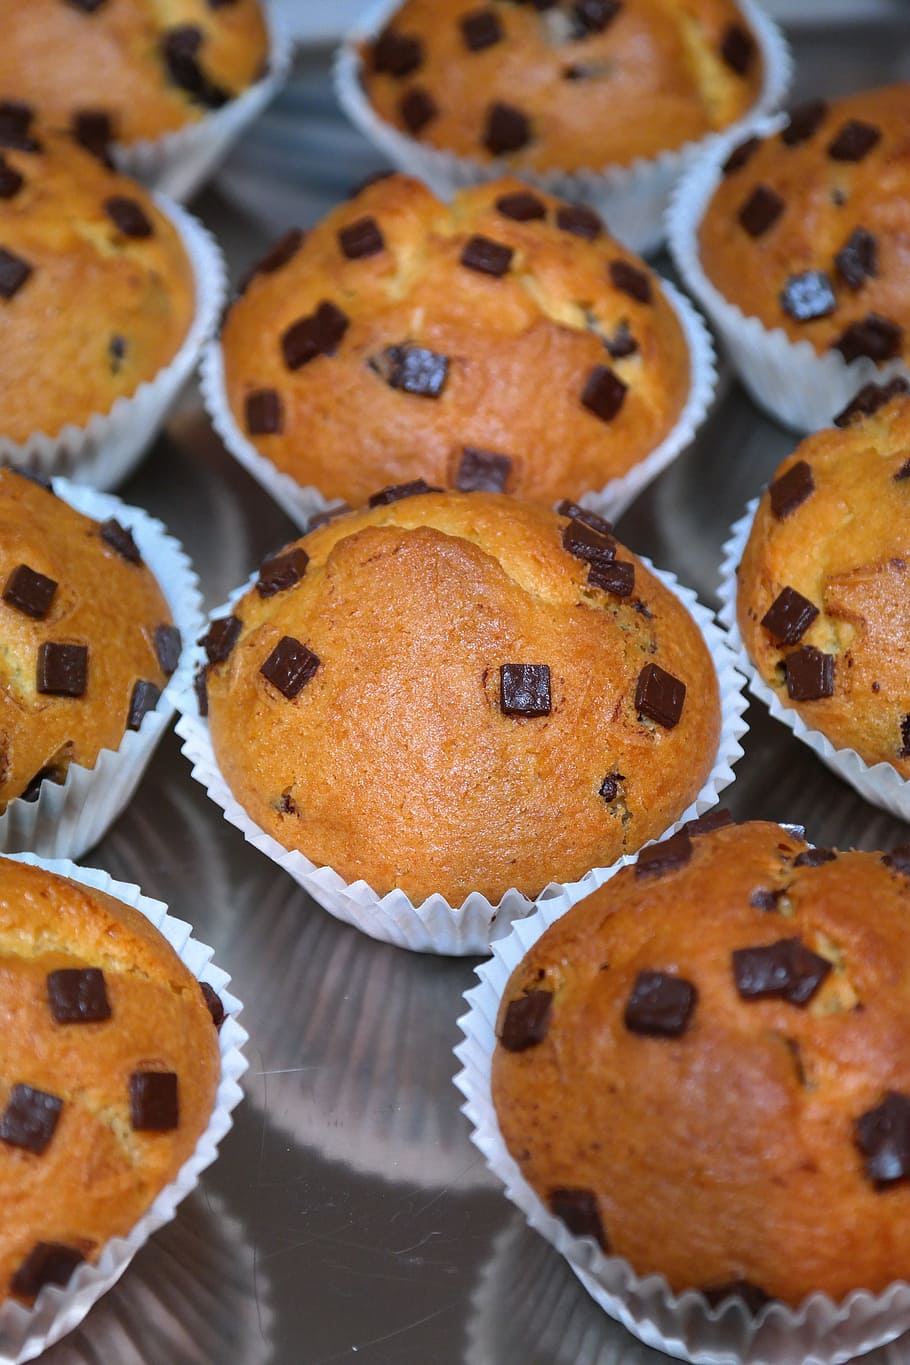 Muffins, Chocolate, schokoladenmuffins, delicious, sweet, calories, treat, small cakes, pastries, food